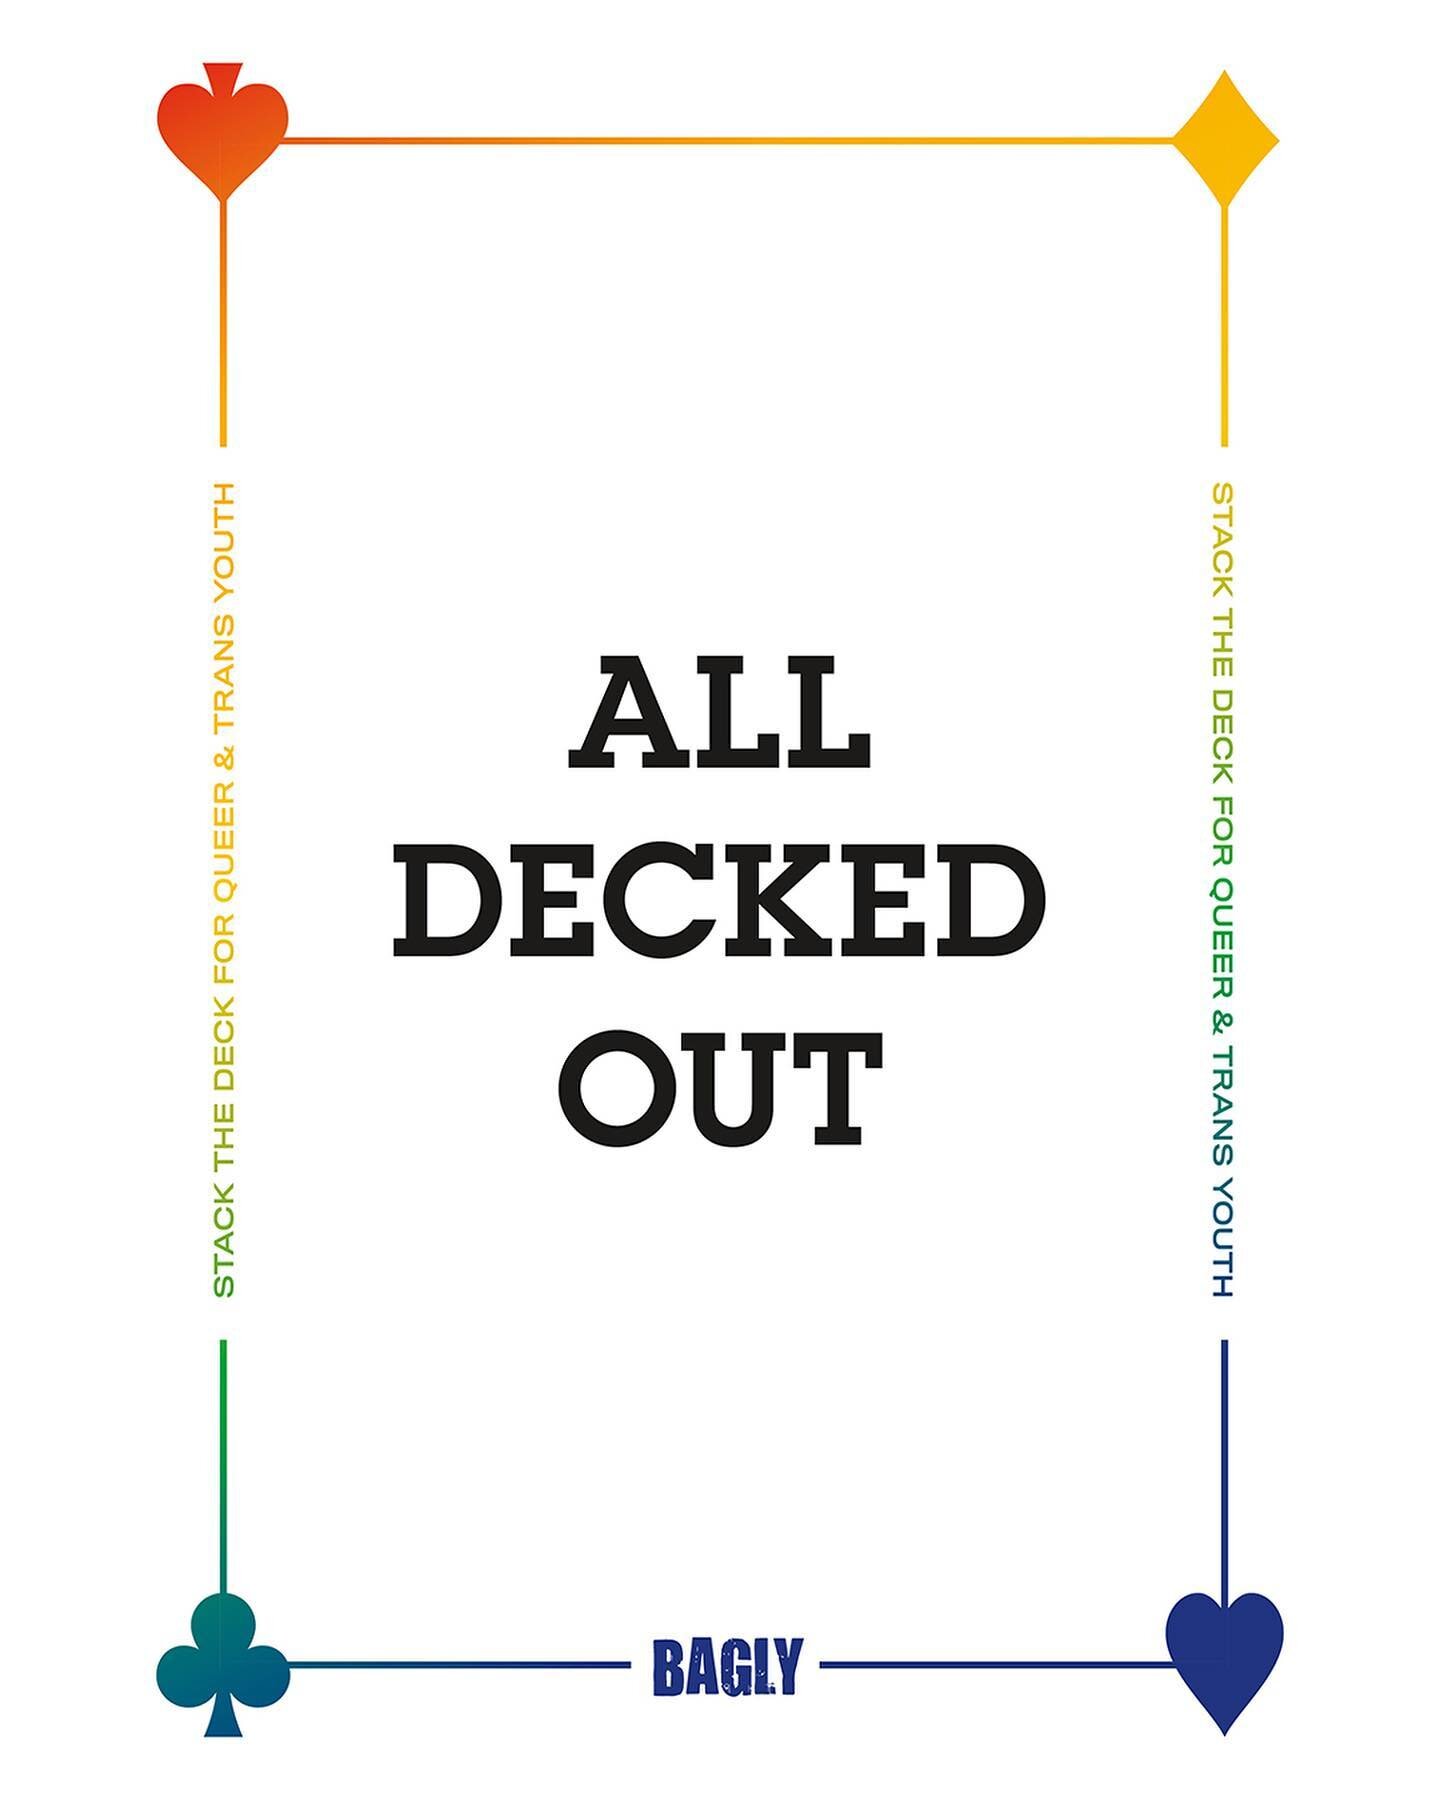 We&rsquo;re laying all our cards out on the table for Youth Pride this year. Come find us on Saturday and look for our exhibit, &ldquo;All Decked Out.&rdquo; That&rsquo;s all we&rsquo;re going to say for now. Don&rsquo;t want to reveal our cards too 